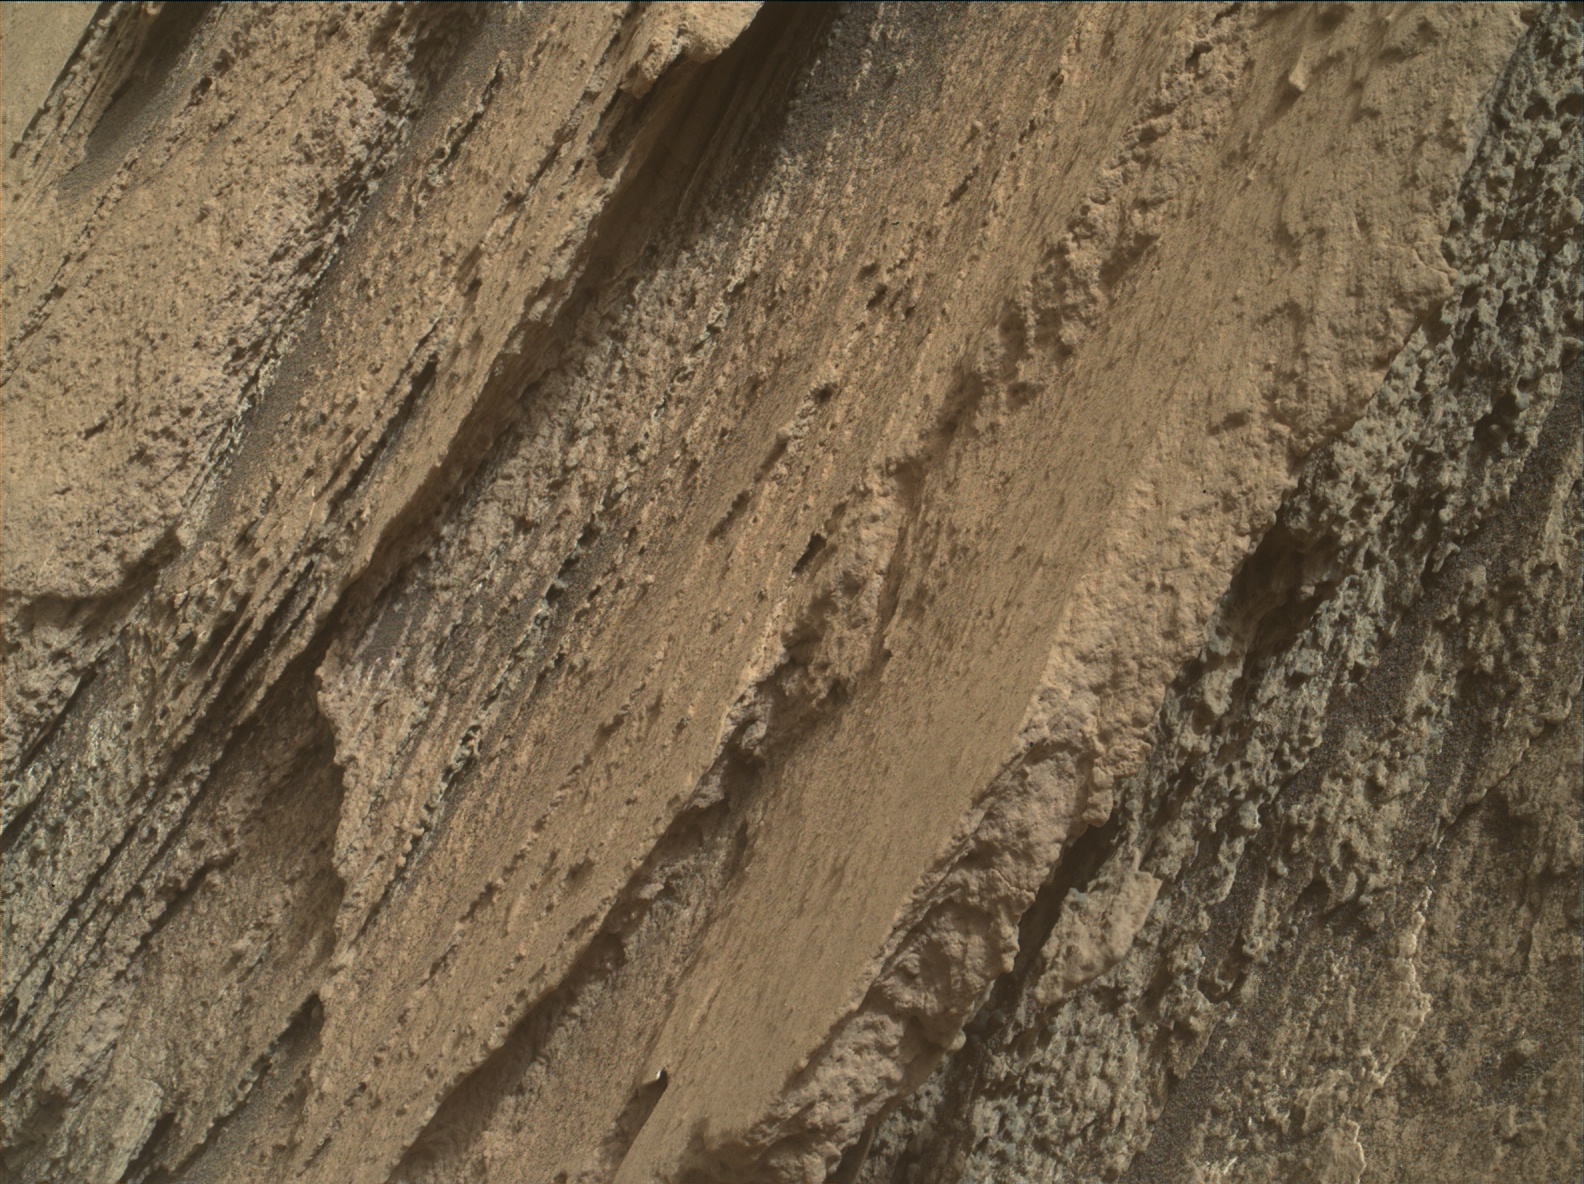 Nasa's Mars rover Curiosity acquired this image using its Mars Hand Lens Imager (MAHLI) on Sol 2582